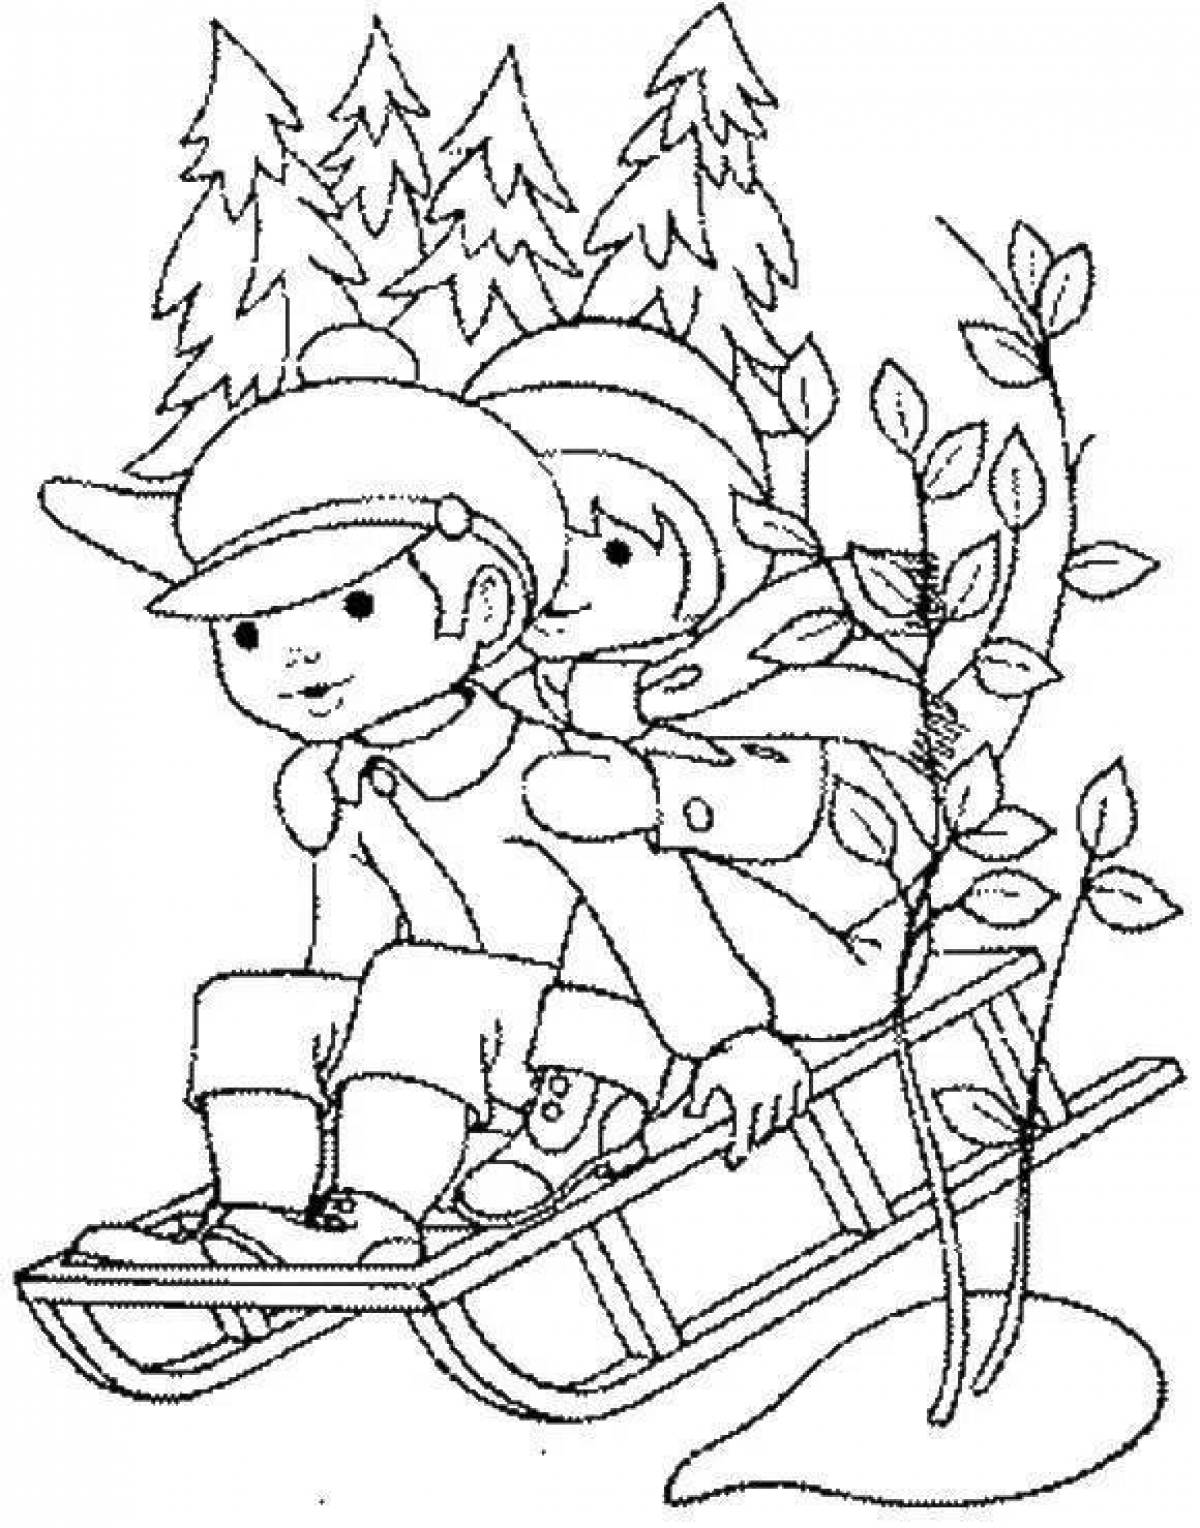 Coloring page excited boy on sled